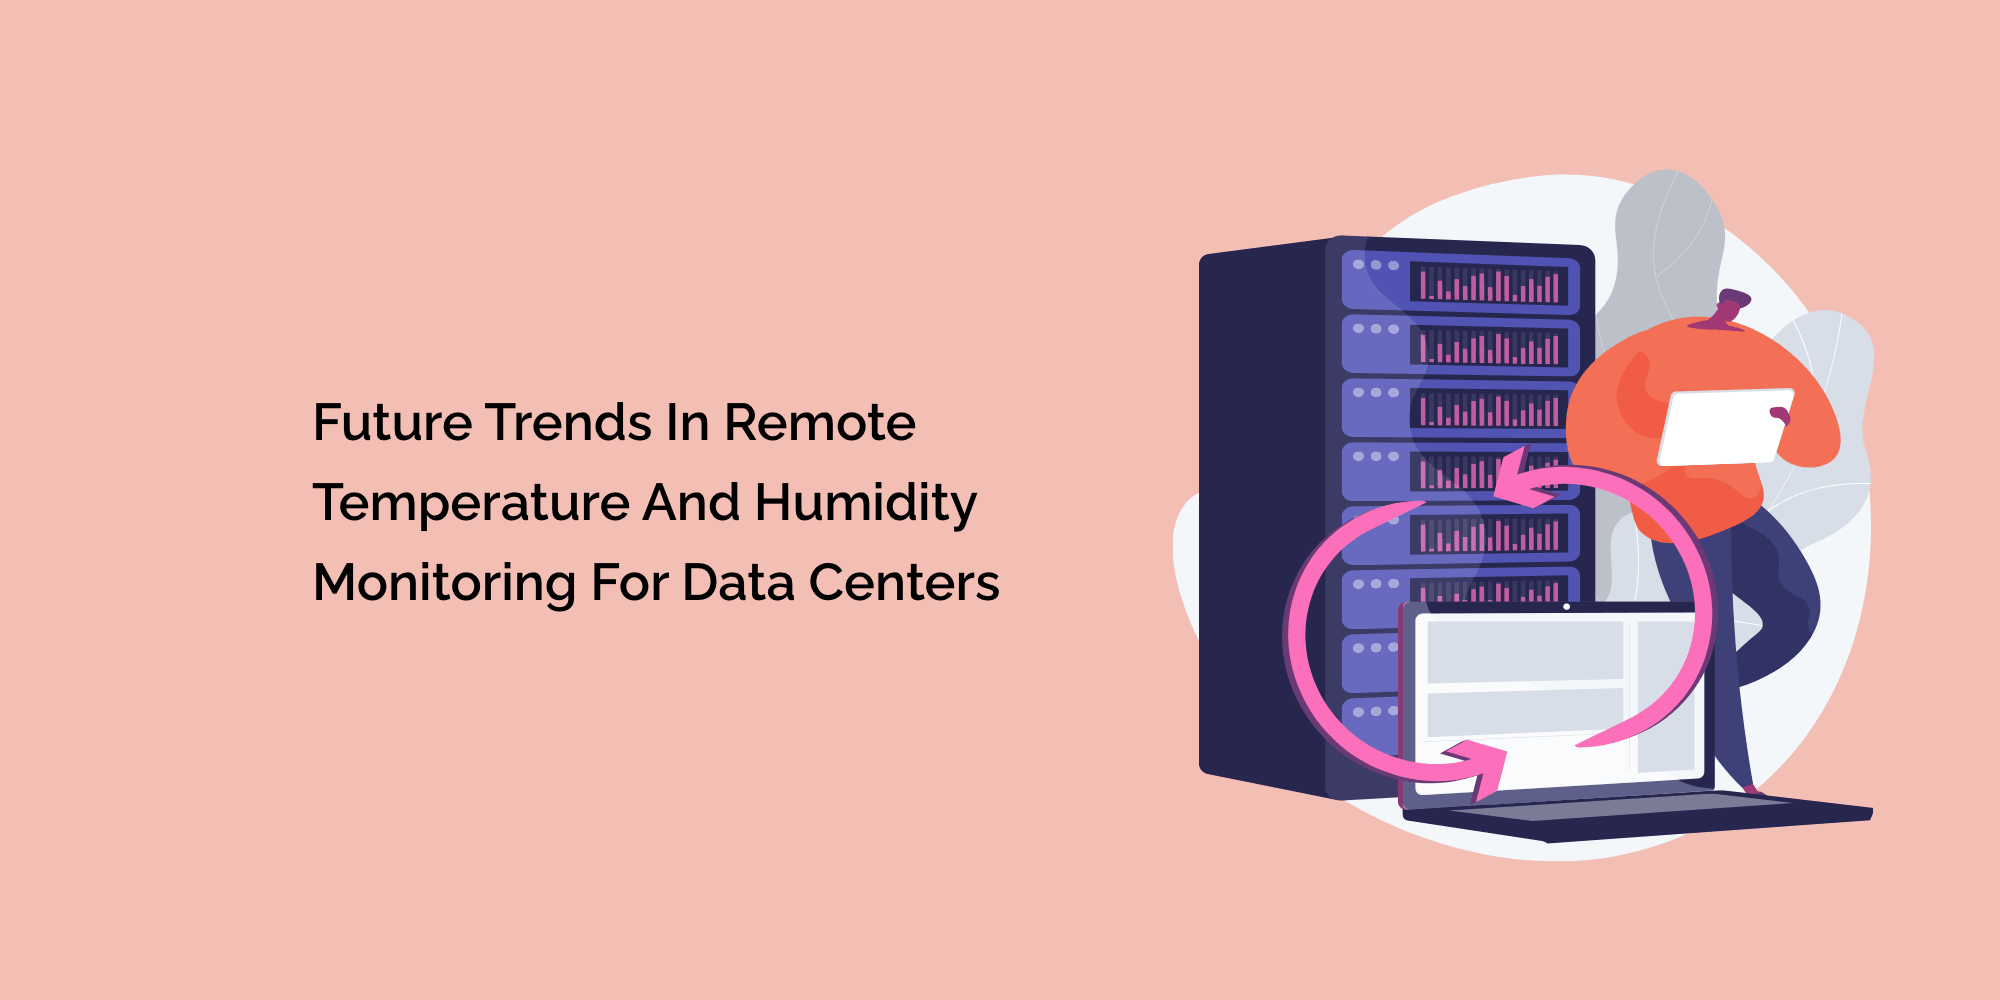 Future Trends in Remote Temperature and Humidity Monitoring for Data Centers